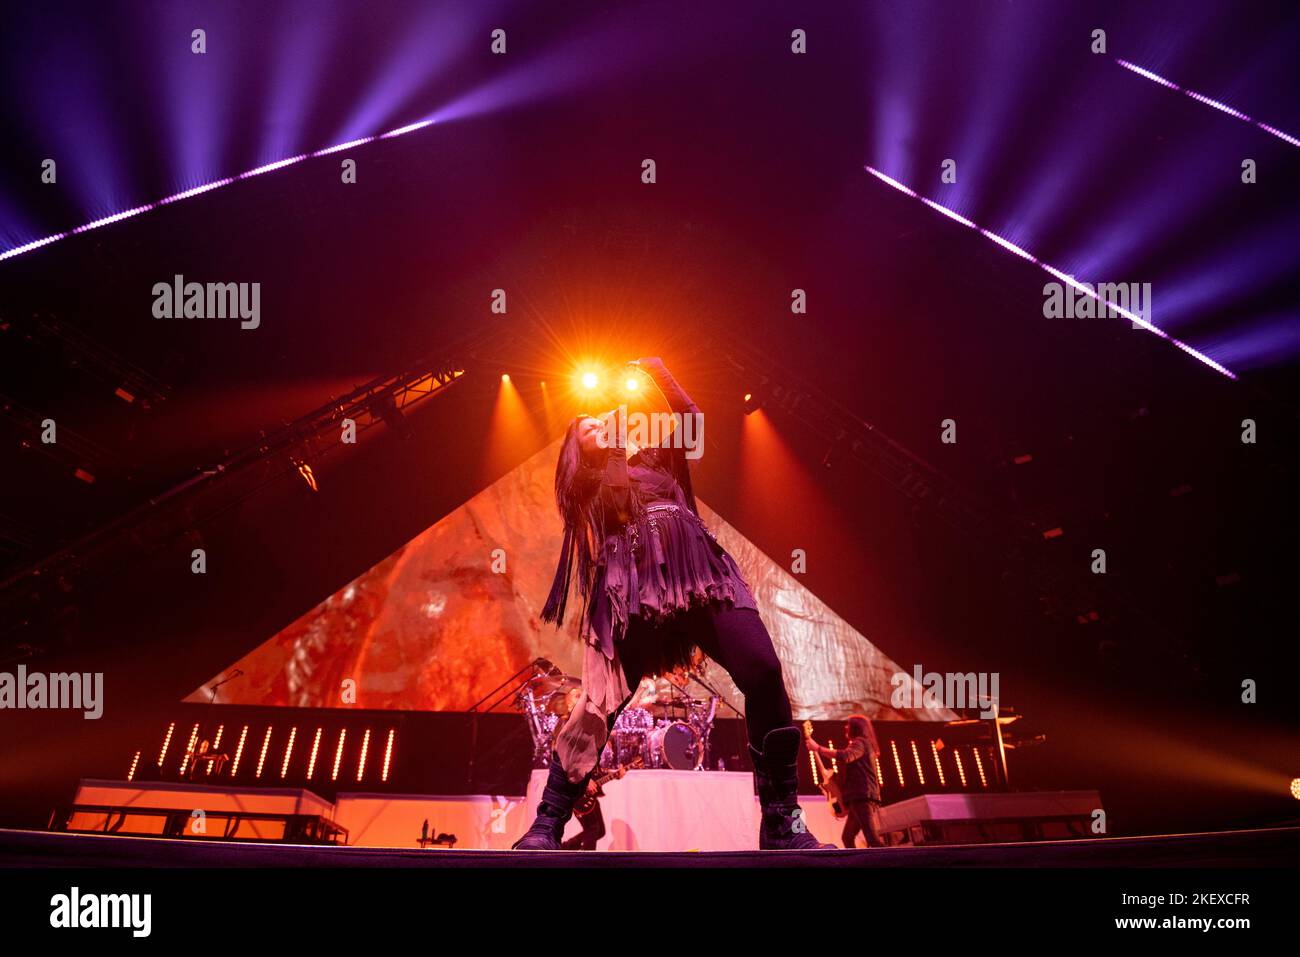 London, UK, 14/11/2022, Vocalist Amy Lee of rock band Evanescence performing in concert at The O2, London.Credit: John Barry/Alamy live news  Stock Photo